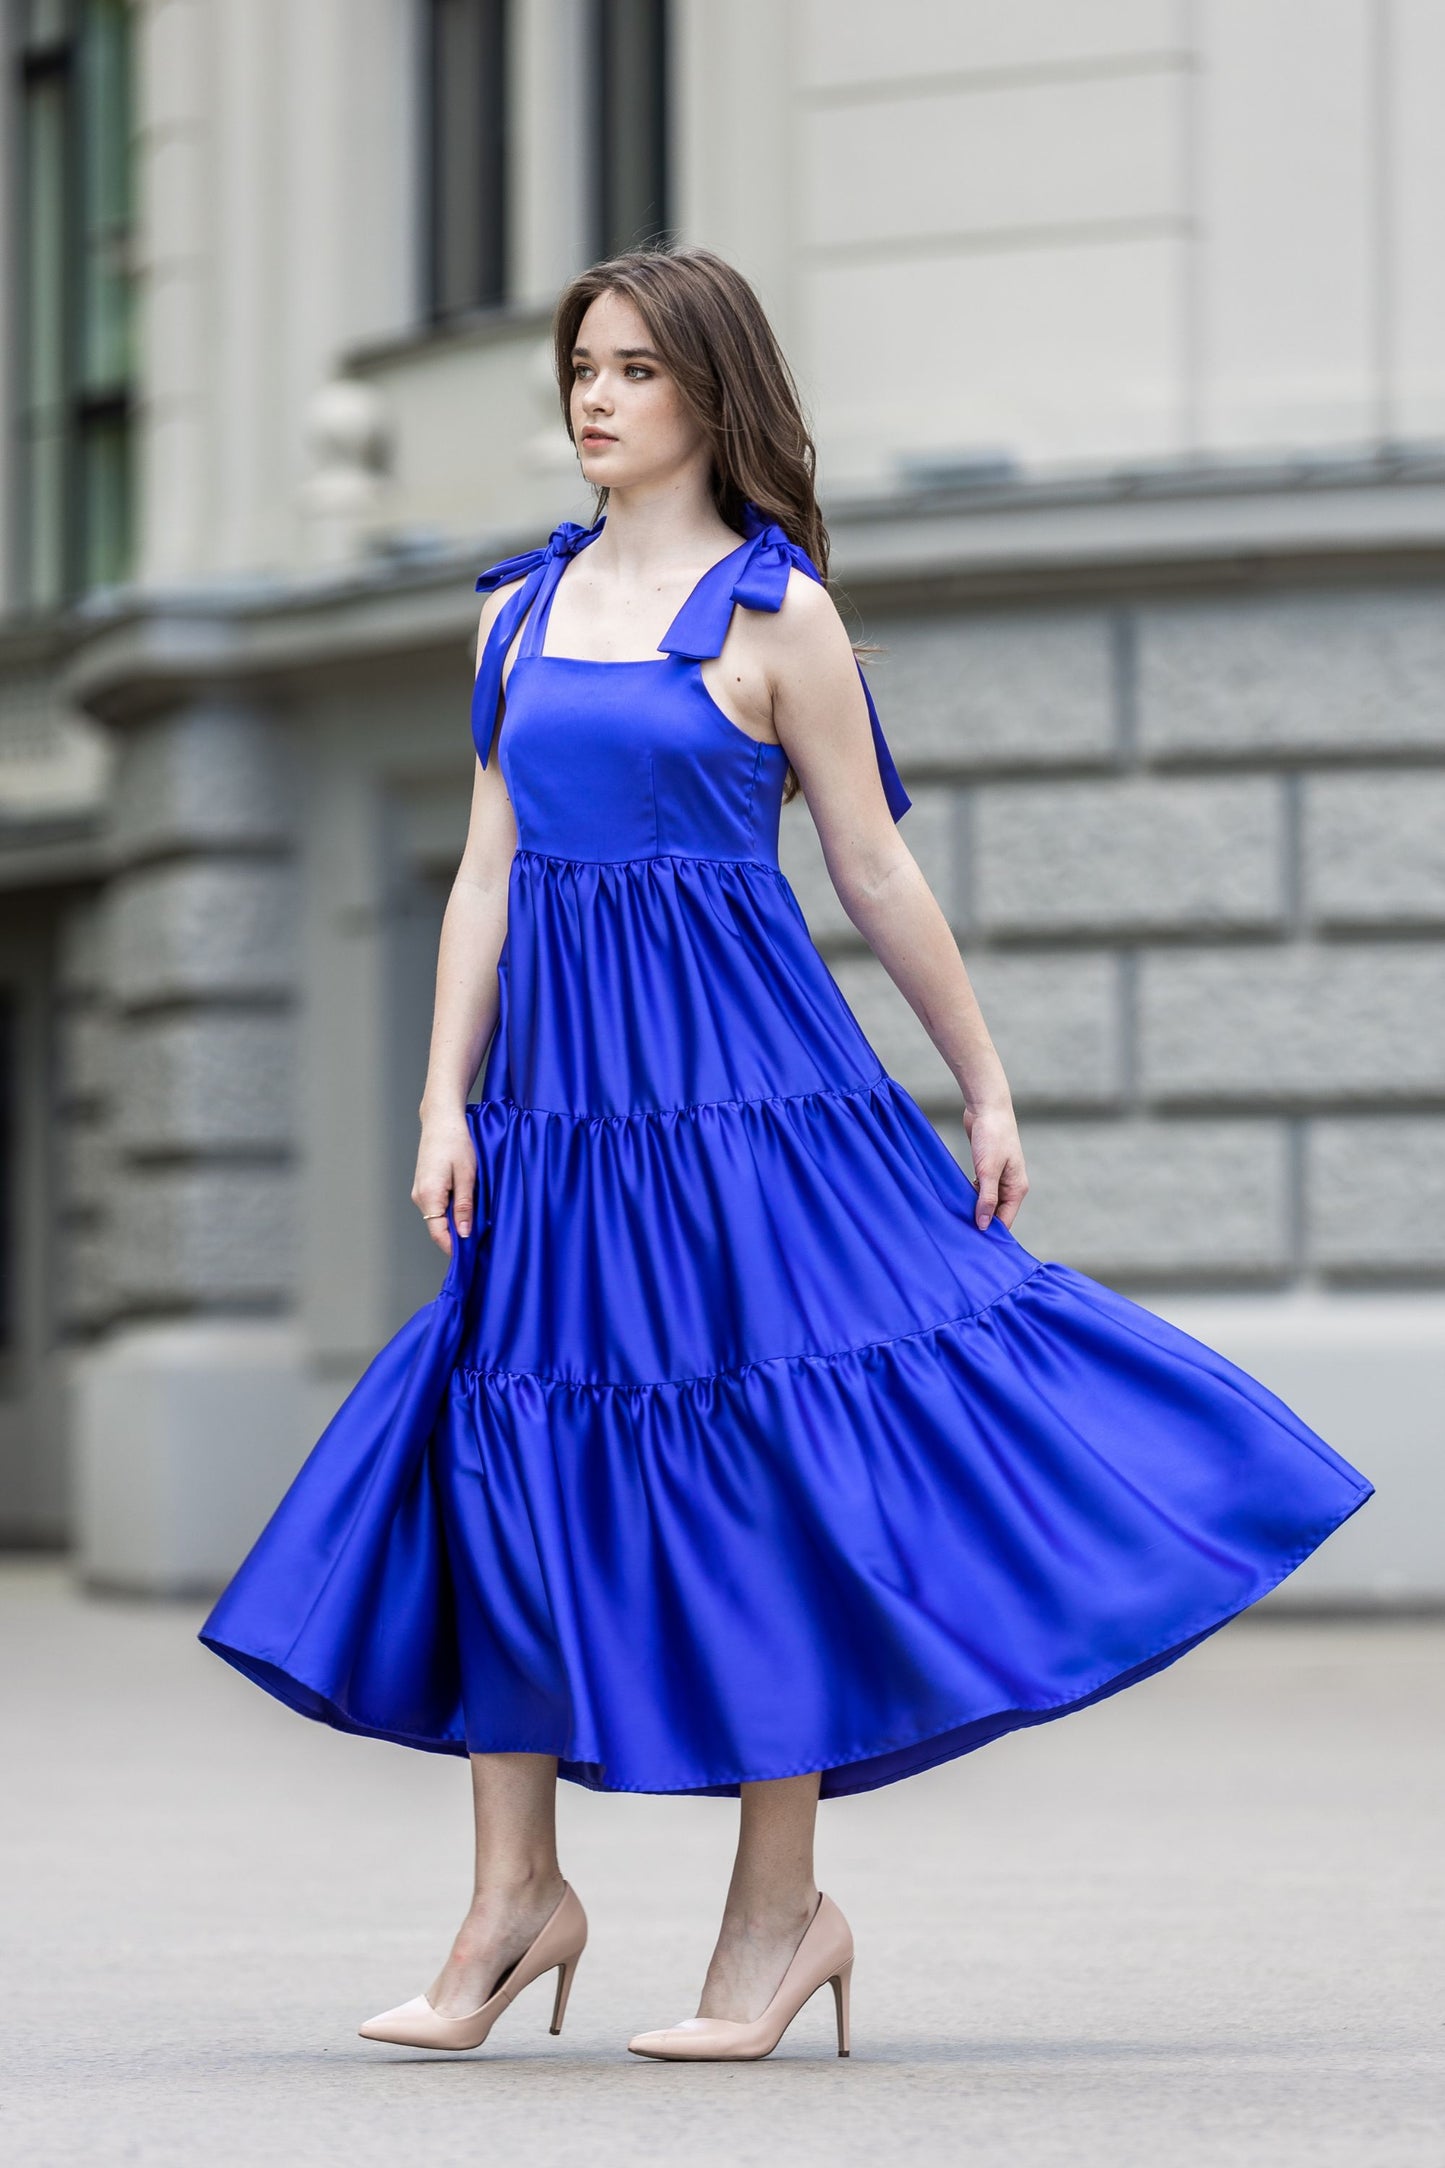 Satin dress with super bows on the shoulders.